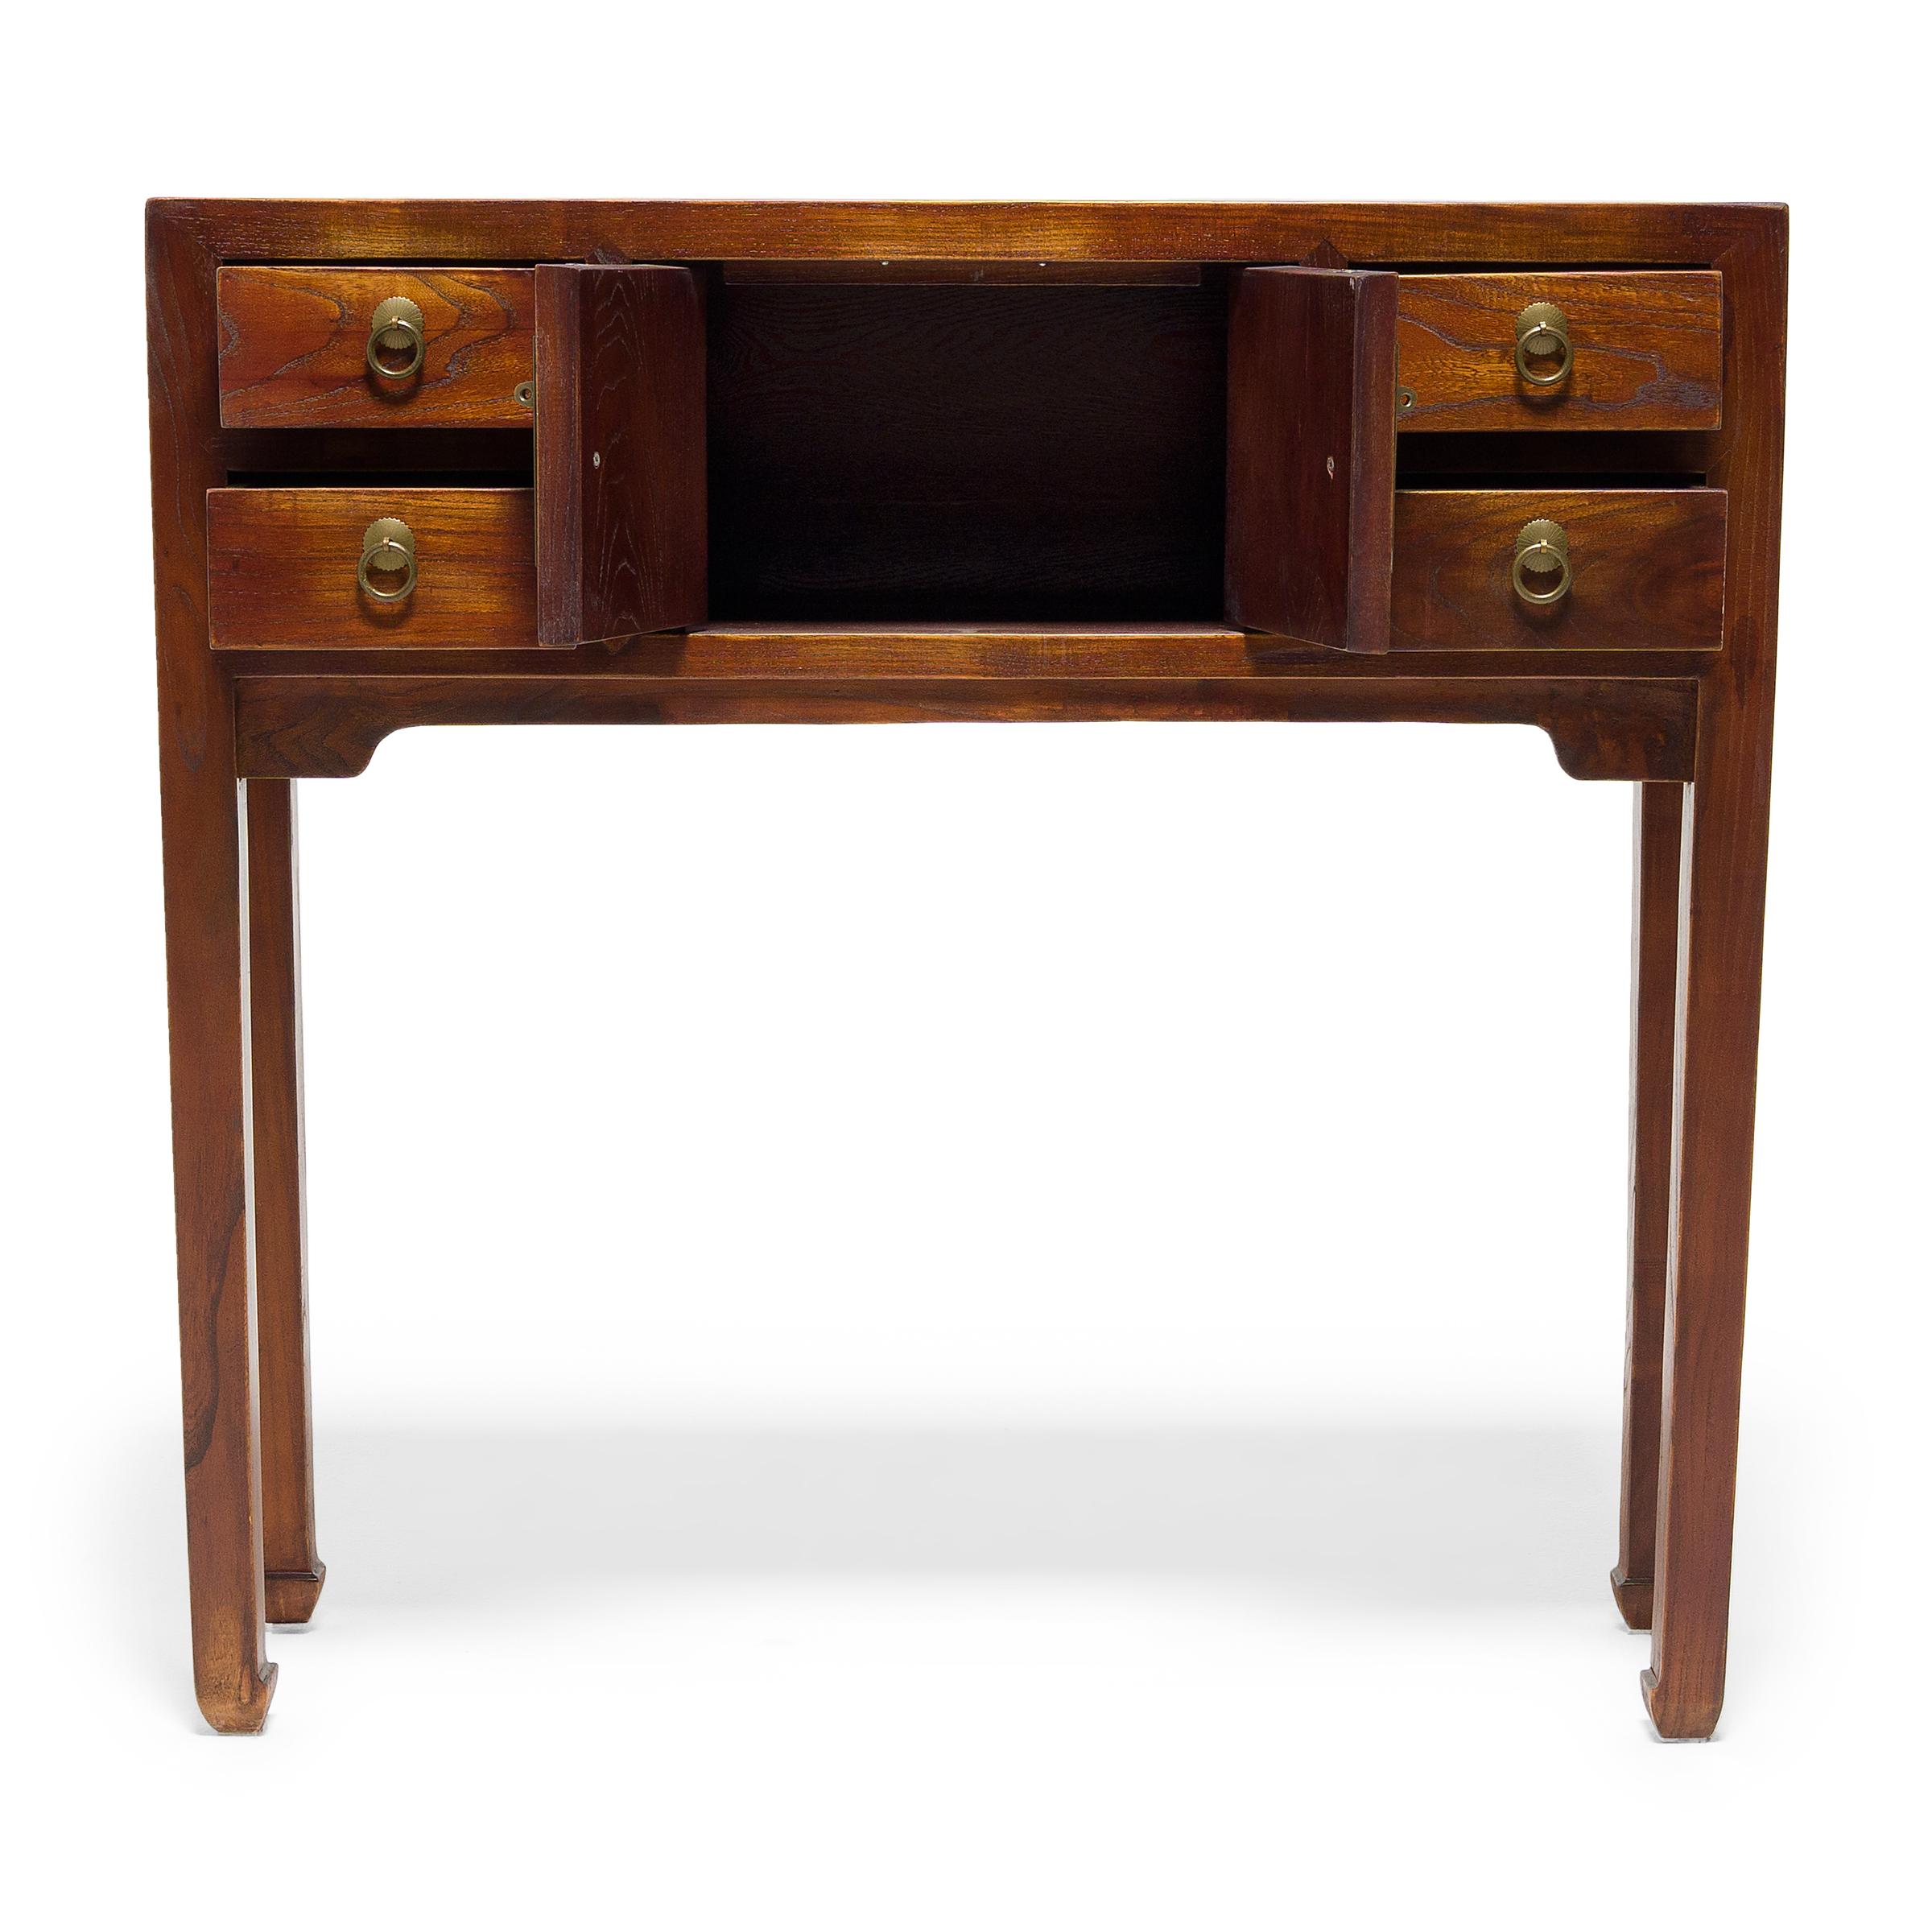 This petite altar coffer keeps with the style of Ming-dynasty furniture with clean lines and minimal ornamentation. The narrow coffer stands on thin legs ending in subtle hoof feet, focusing the eye upwards to its squared frame. The table features